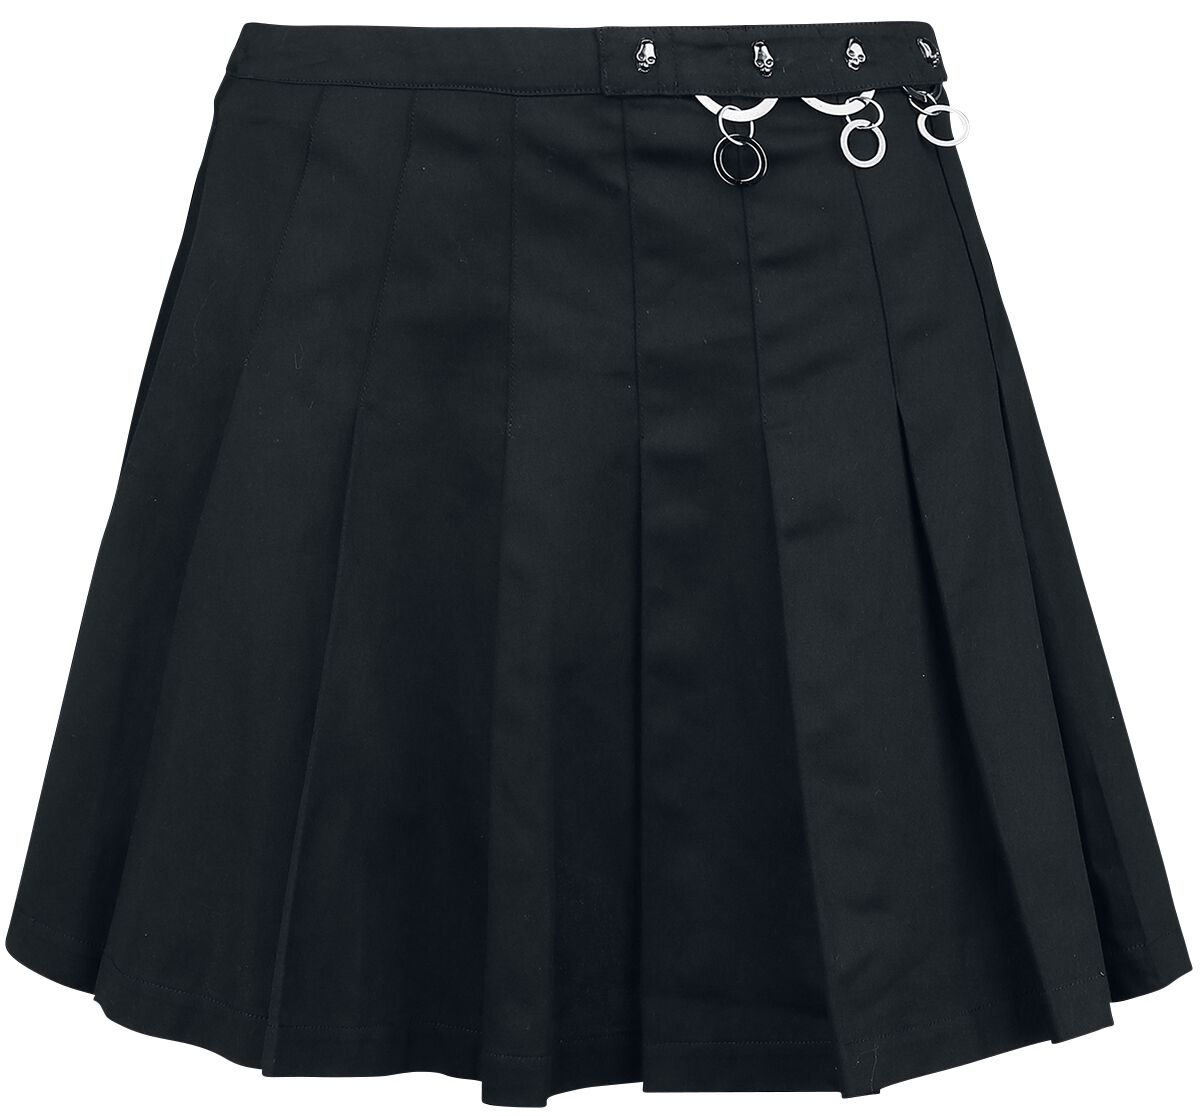 Image of Minigonna Gothic di Banned Alternative - Pleated Ring Skirt - XS a XL - Donna - nero